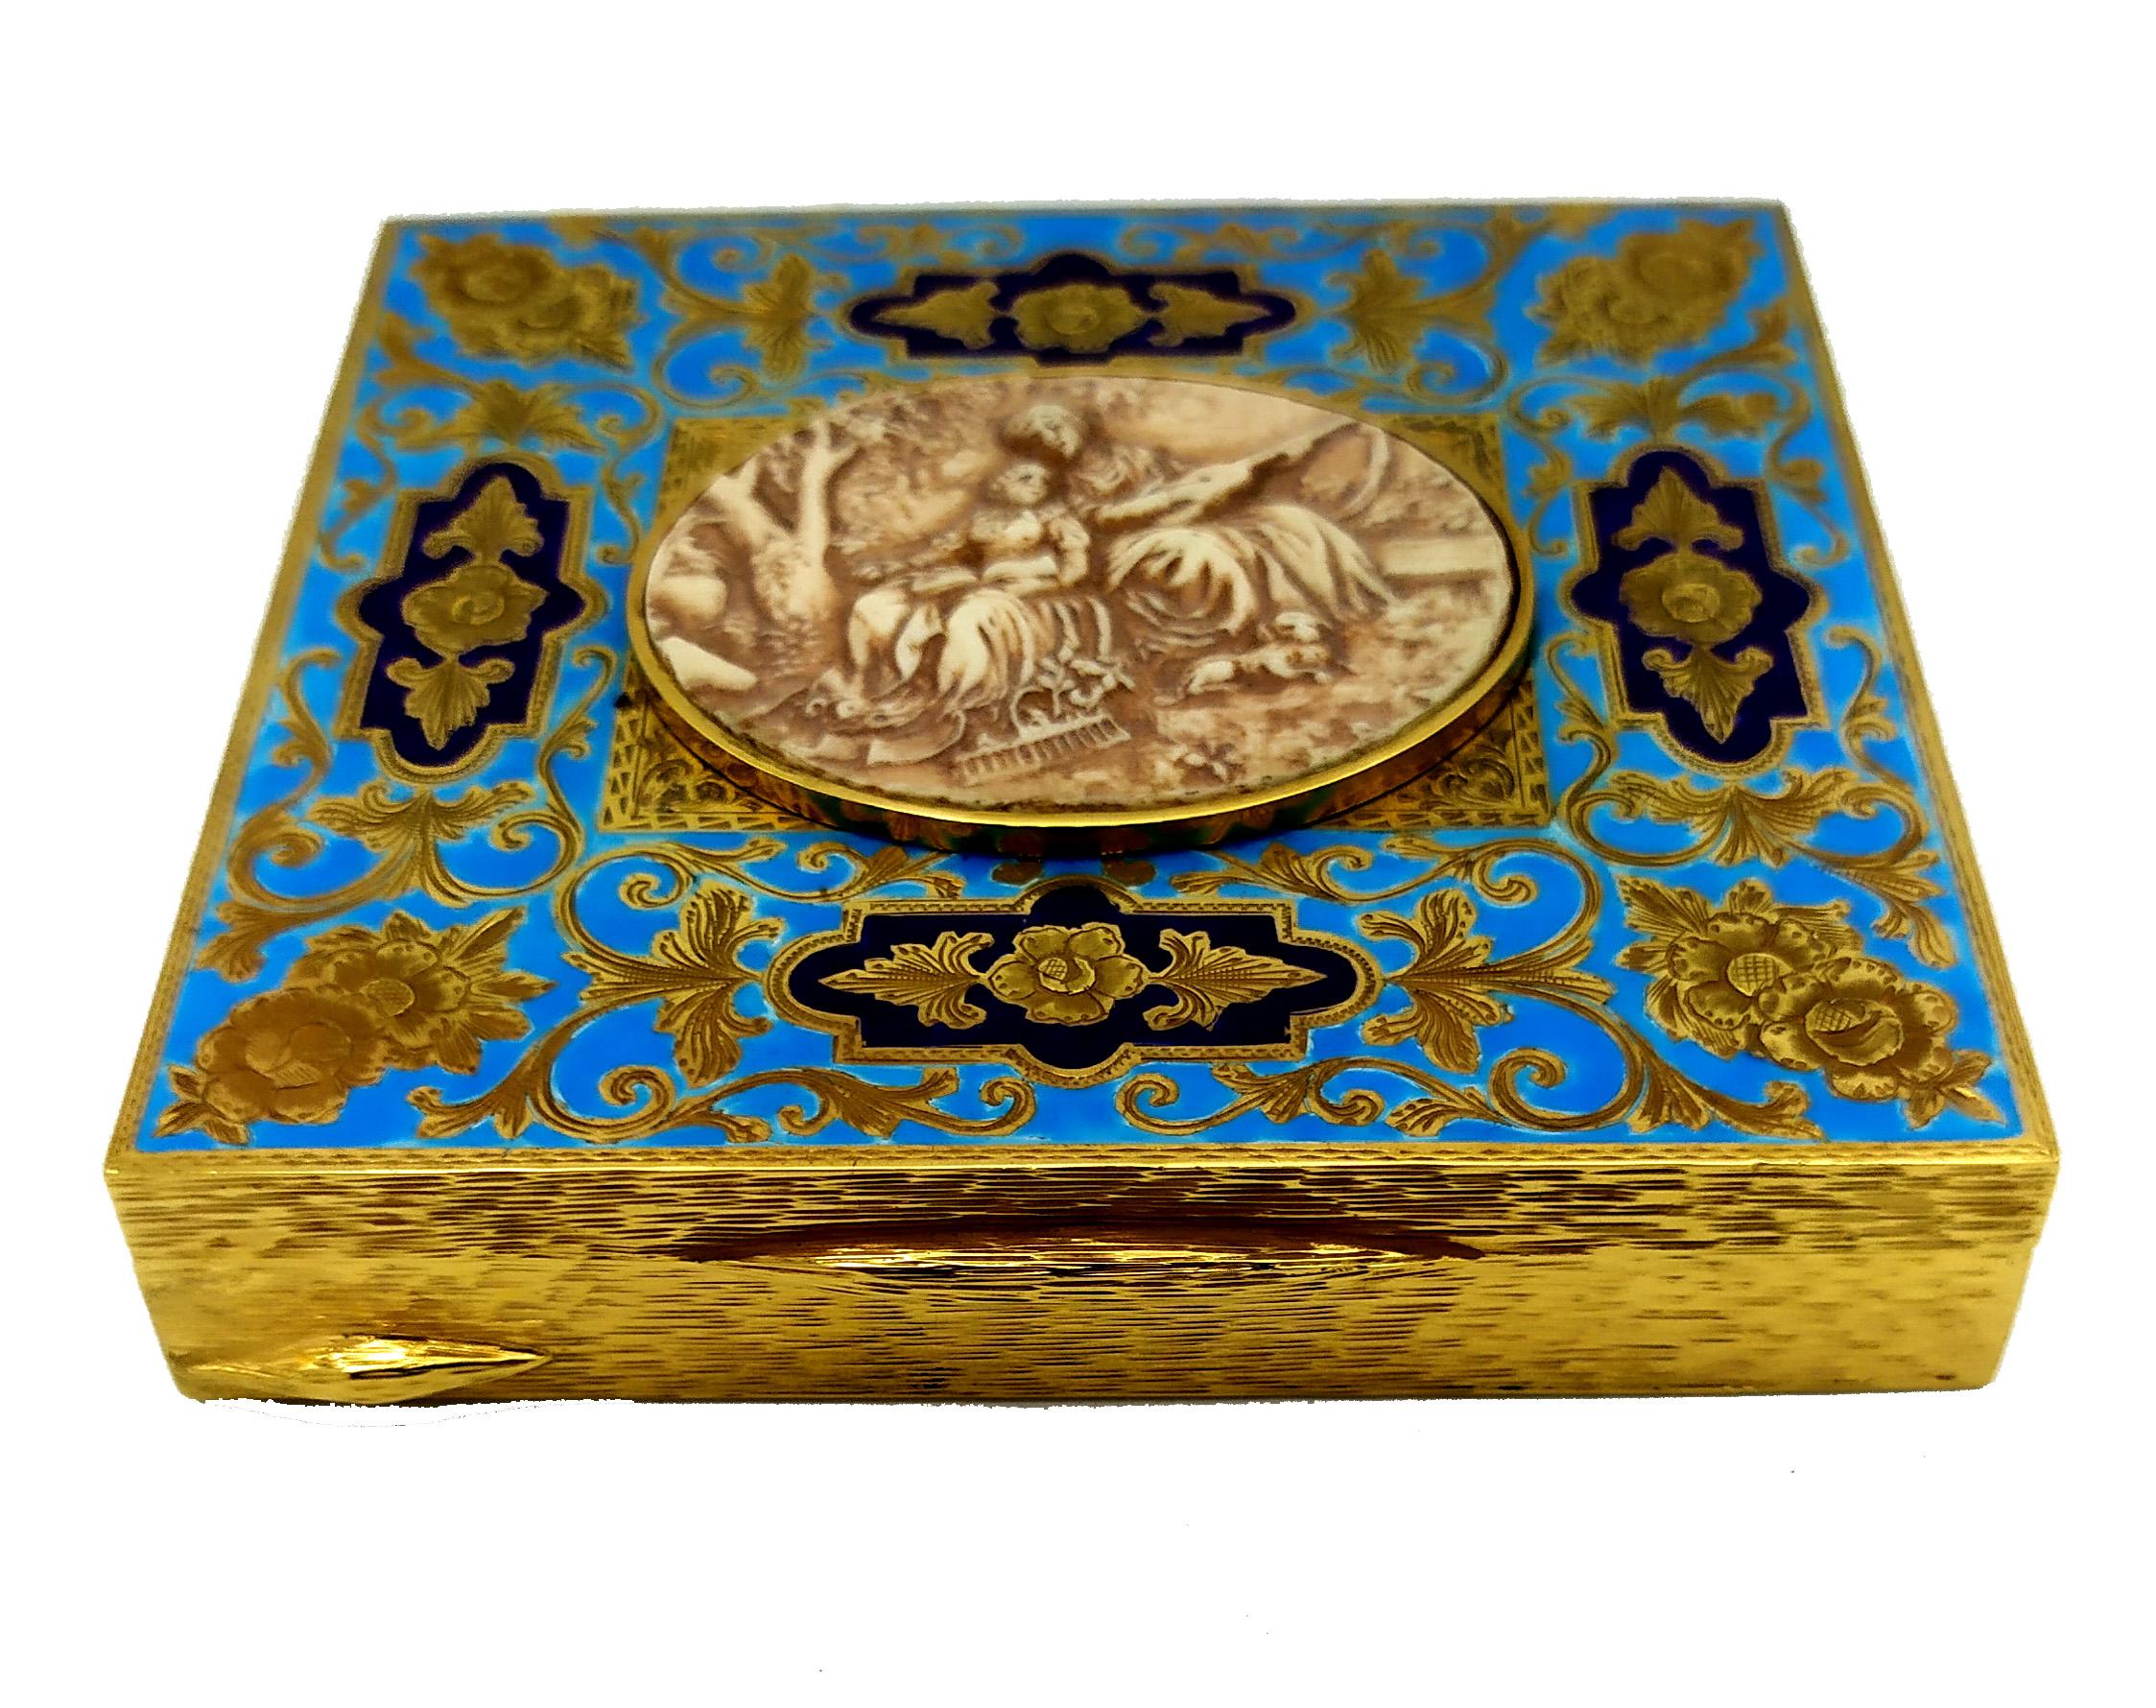 Rectangular table box in sterling silver 925/1000 gold plated with very fine hand-engraving Baroque style on the lid, fire-enamelled in 2 colours. In the center an ancient oval plate cm. 4 x 4.8 hand carved depicting a pastoral scene. Measurements